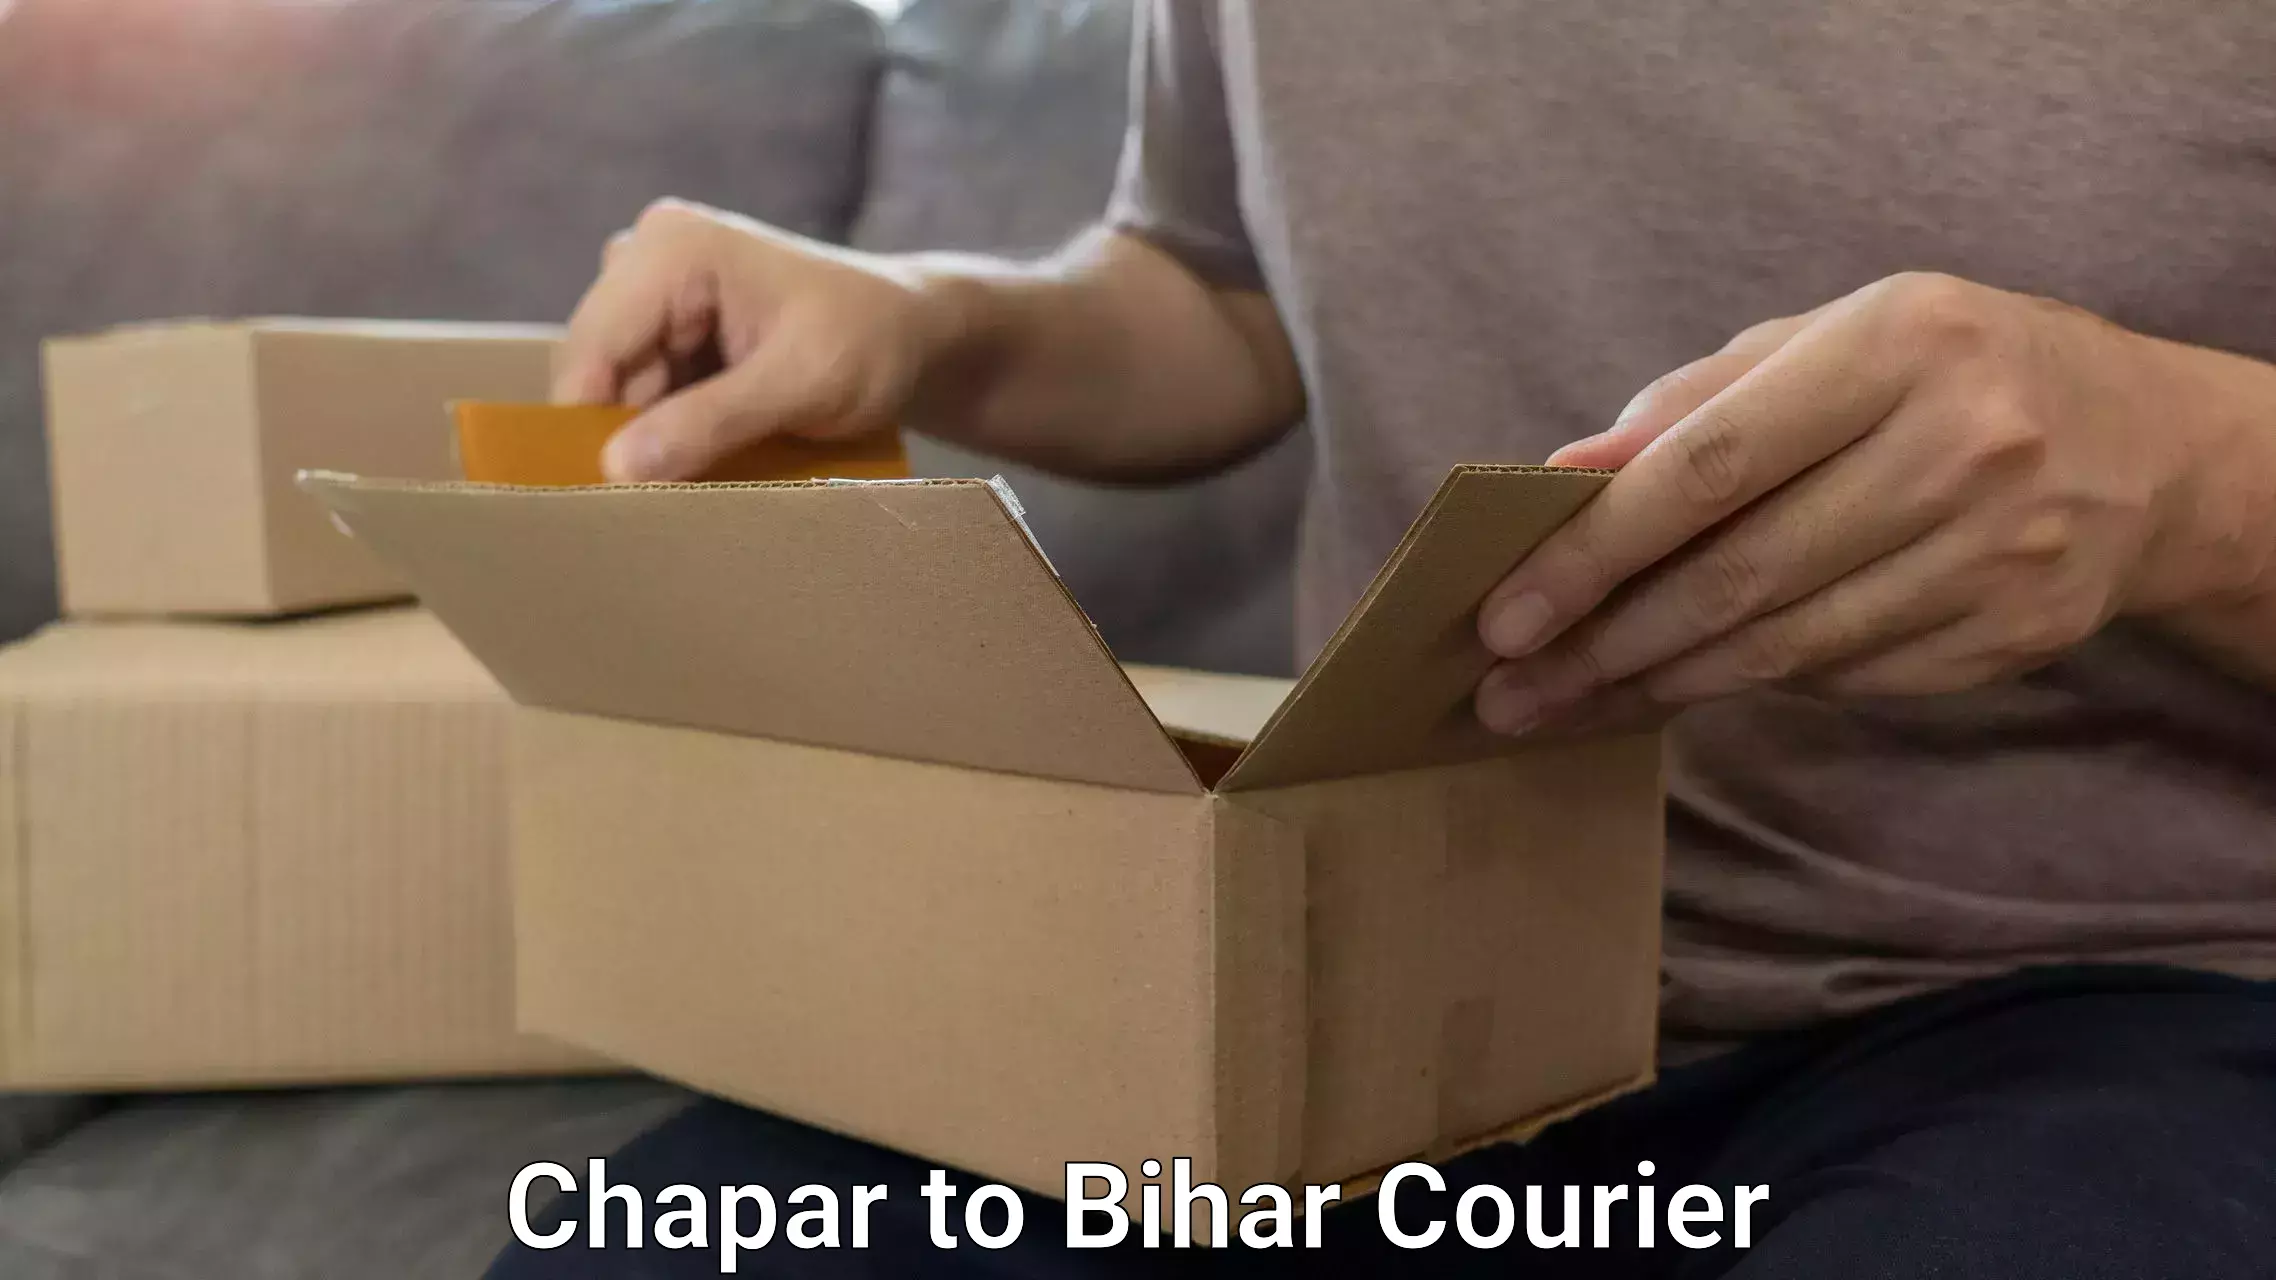 Luggage shipping specialists Chapar to Dhaka